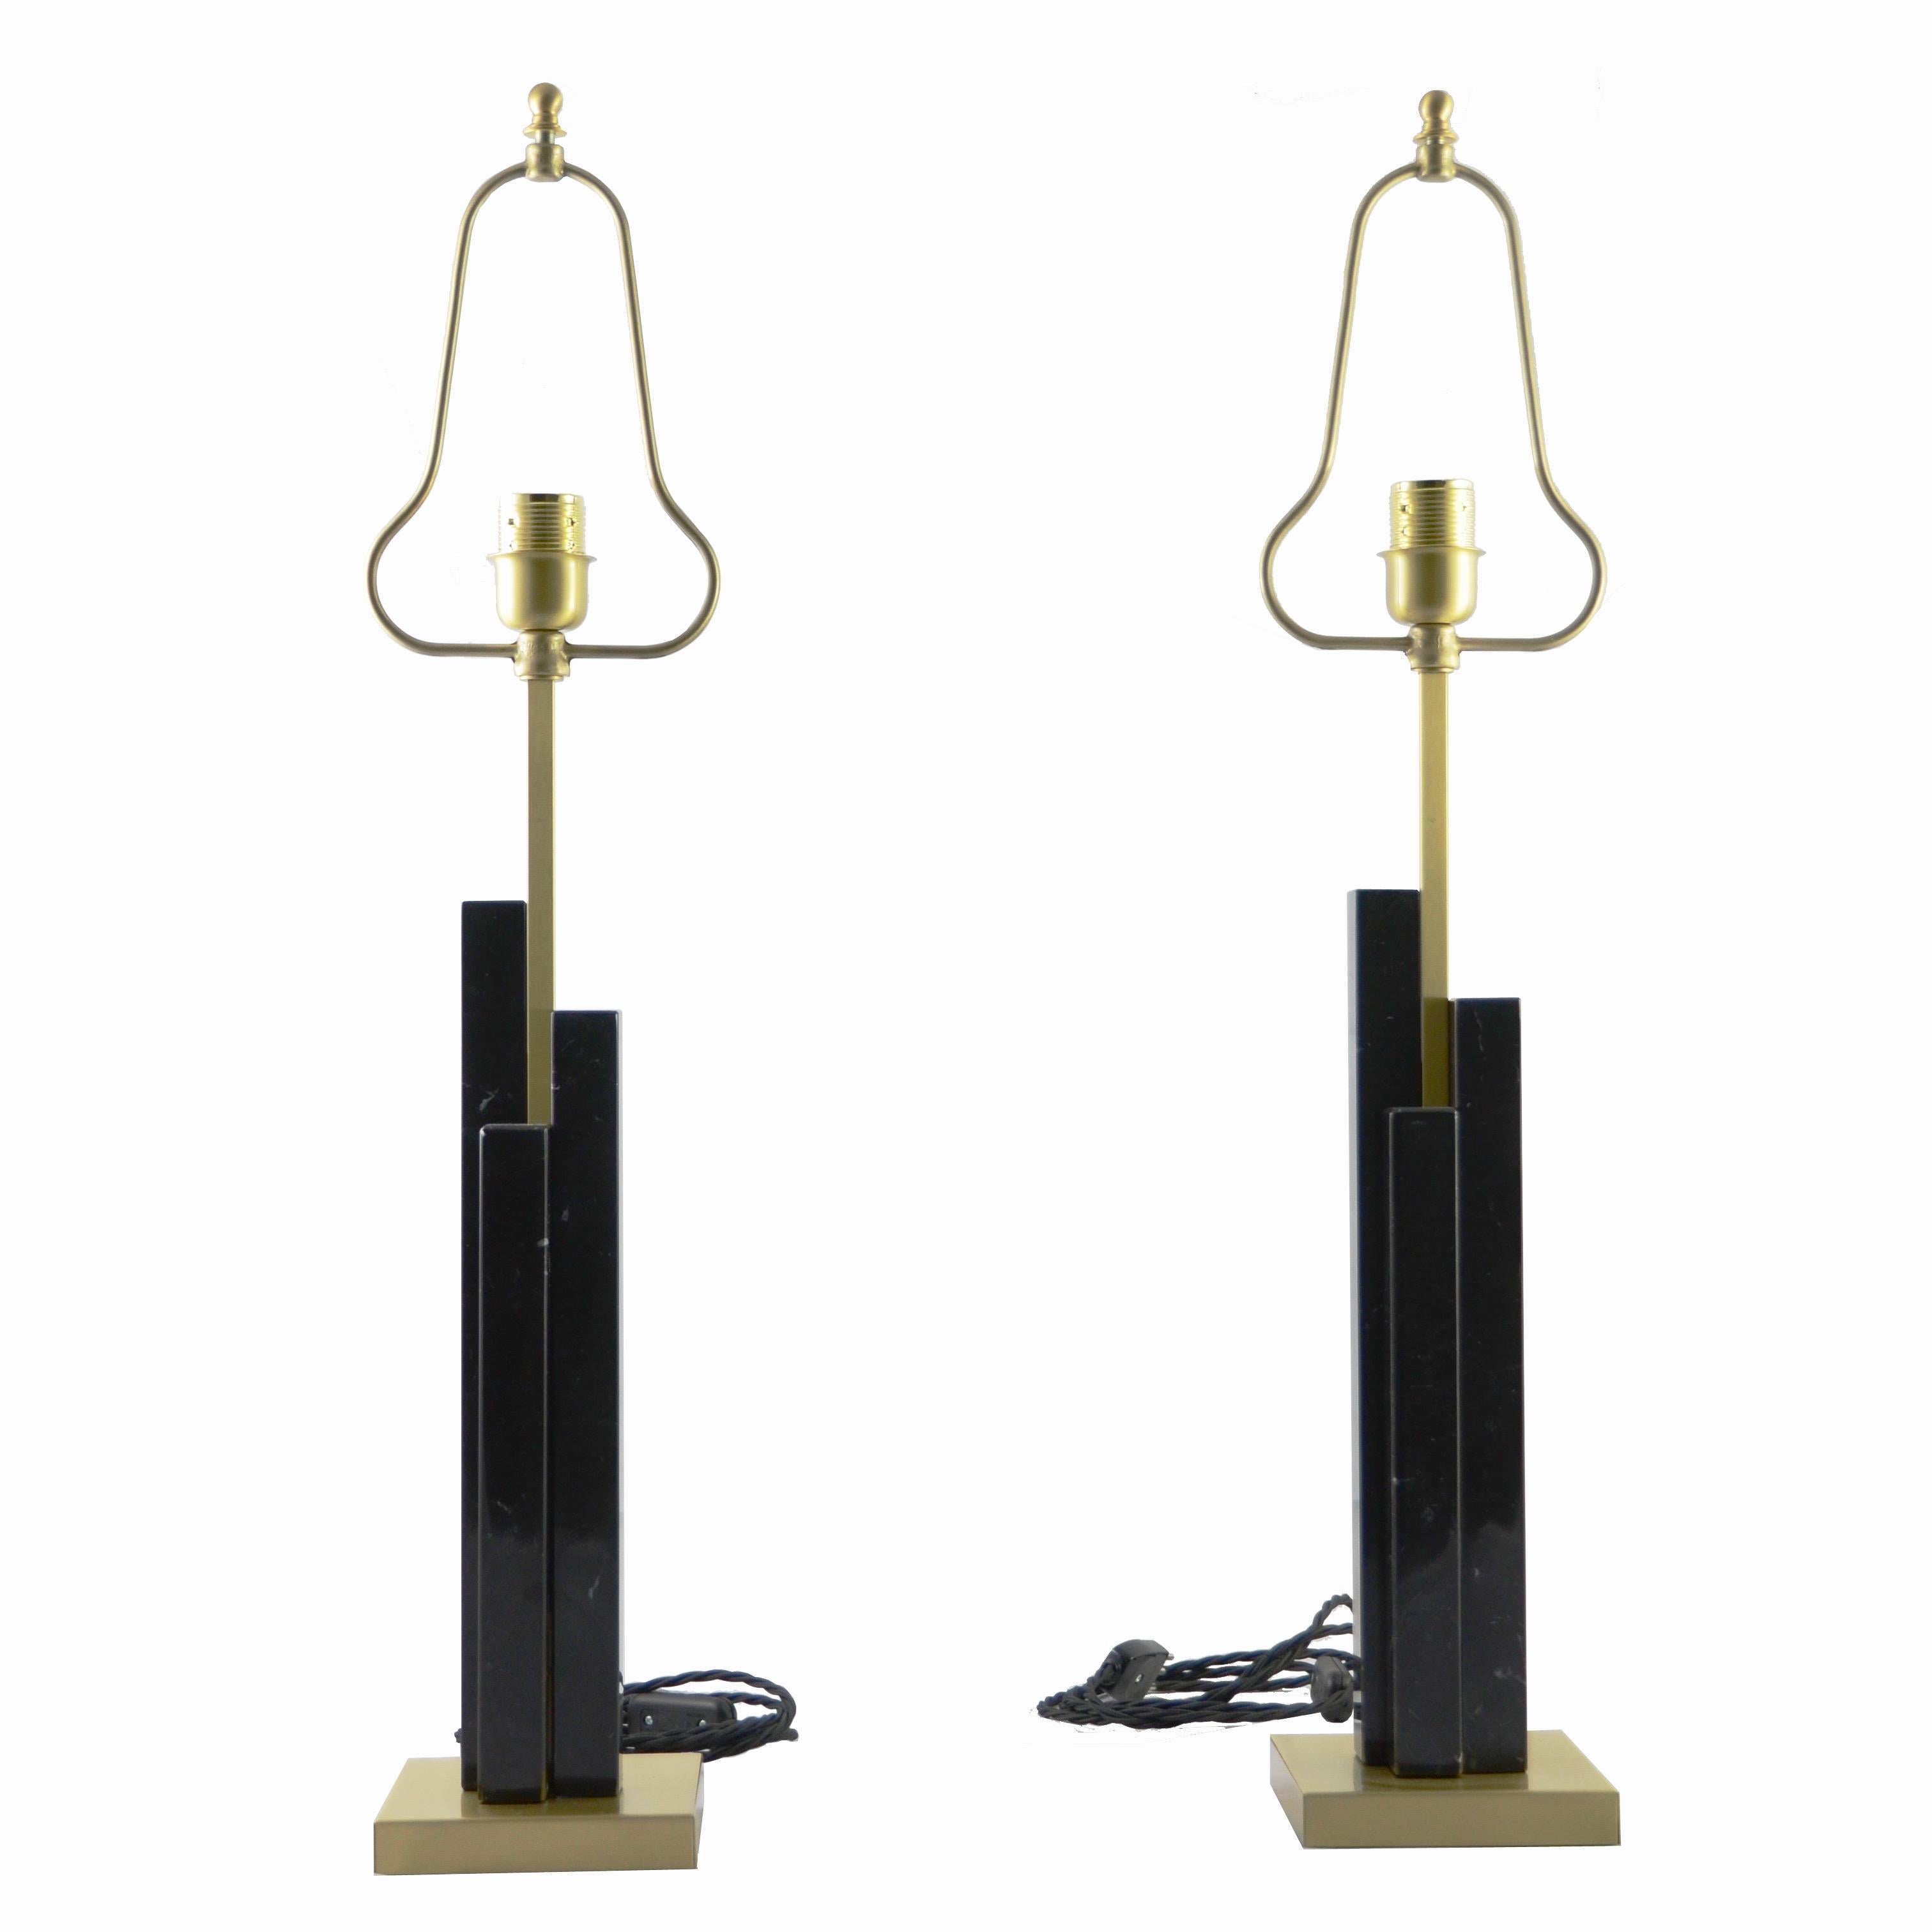 Contemporary Bespoke Art Deco Design Skyline Pair of Black Marble and Satin Brass Table Lamps